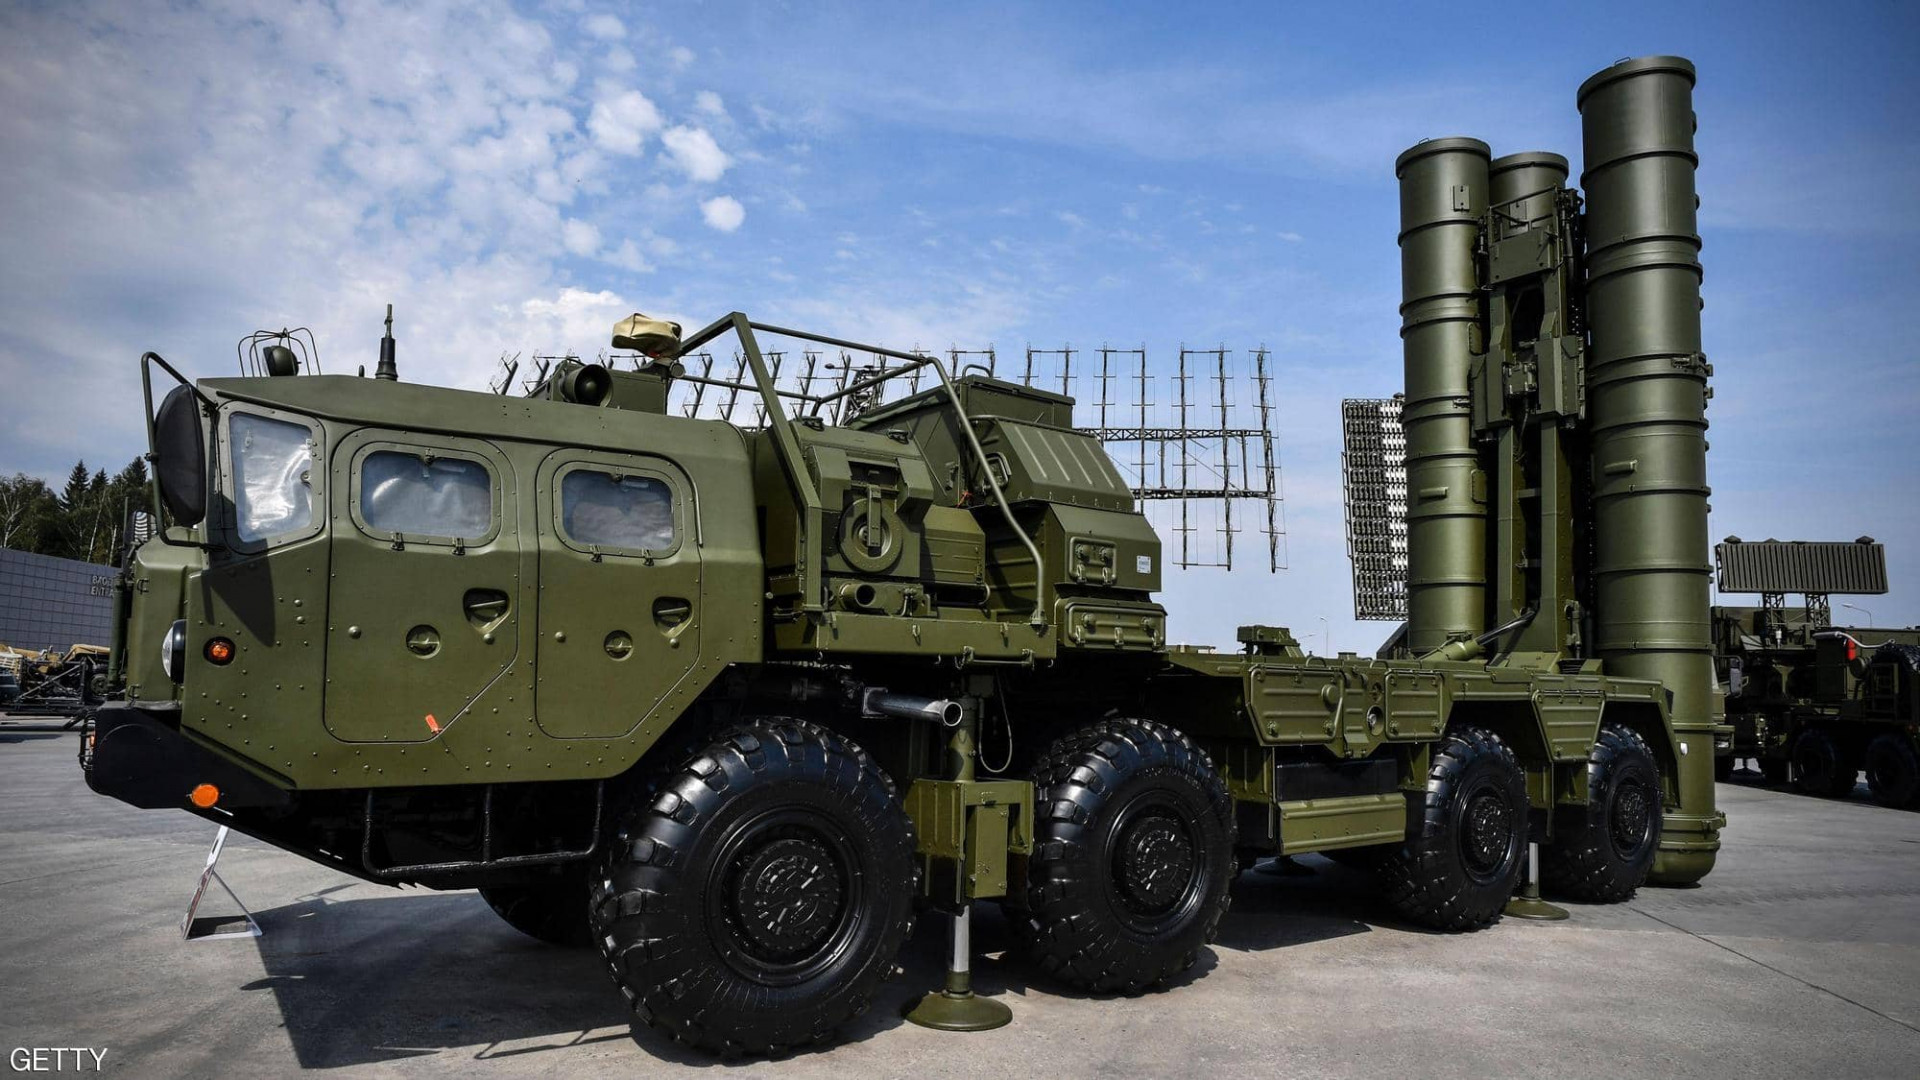 U.S. warns Turkey of the "Serious Consequences" of testing the S-400 system